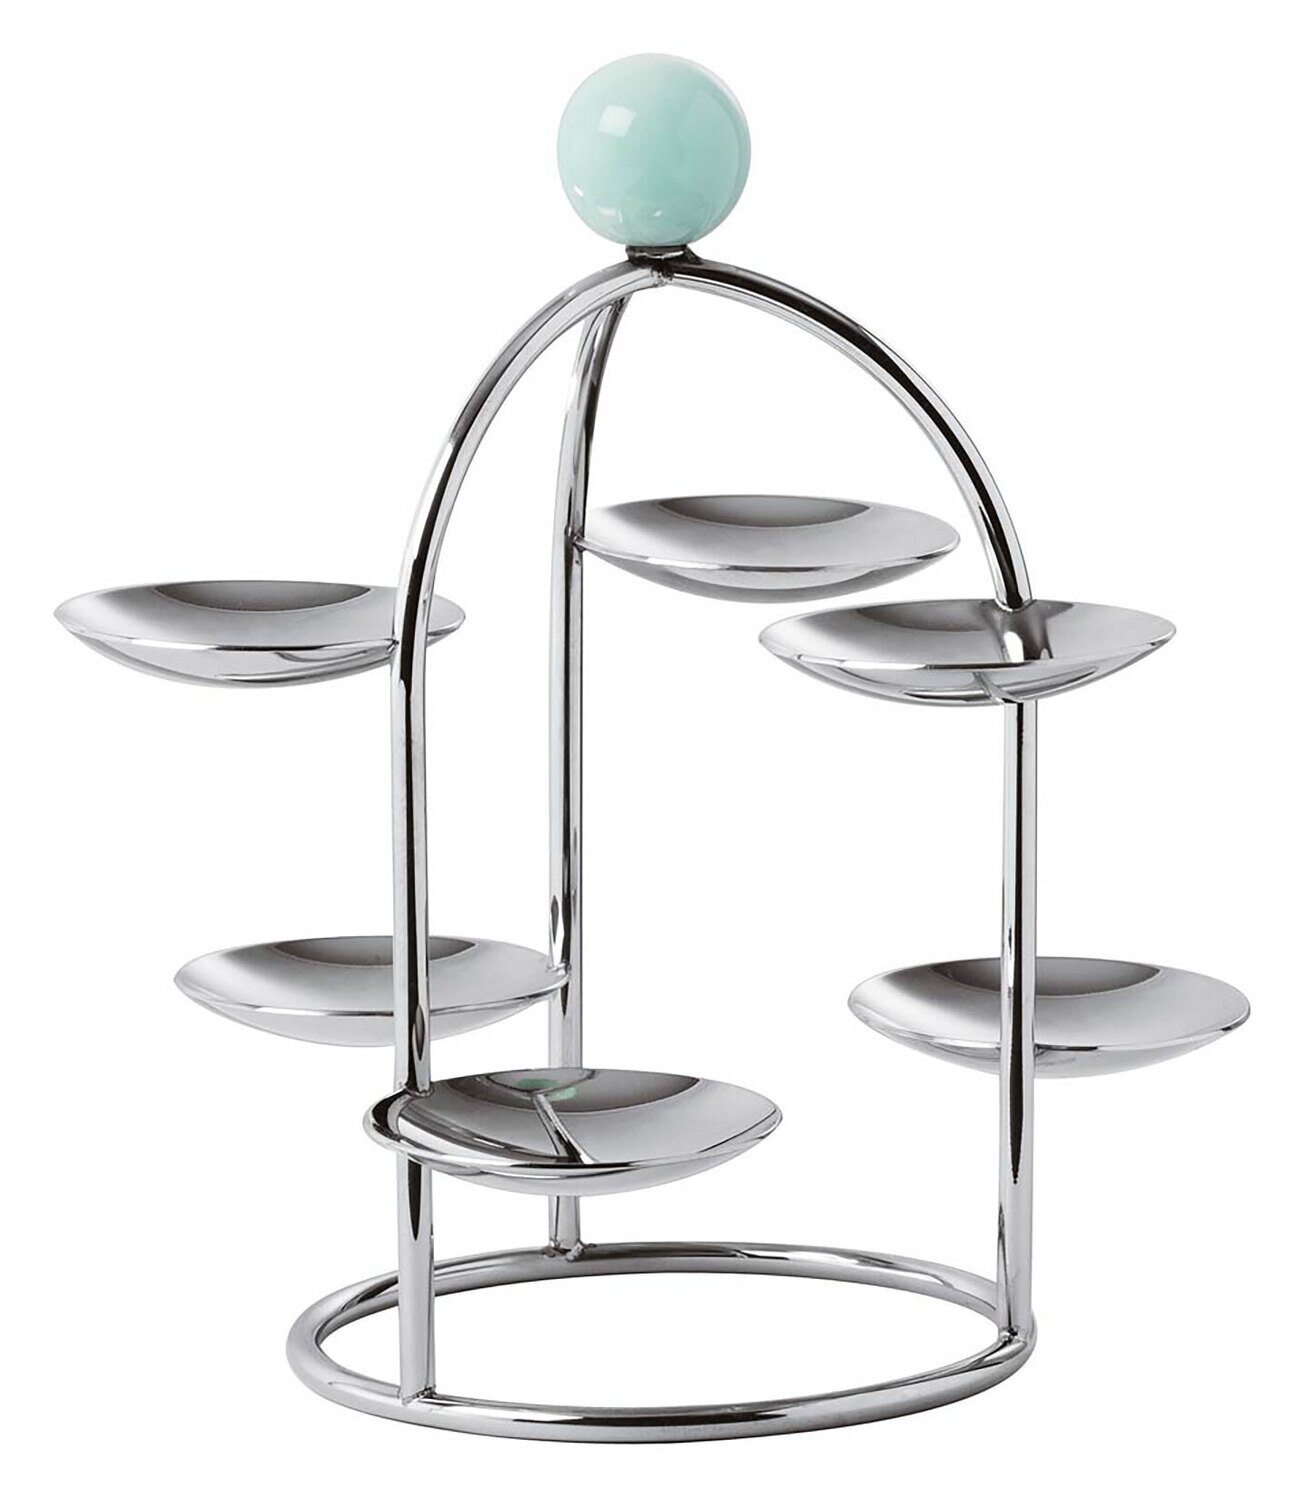 Sambonet Penelope Pastry Stand 6 Small Dishes 56577-A7